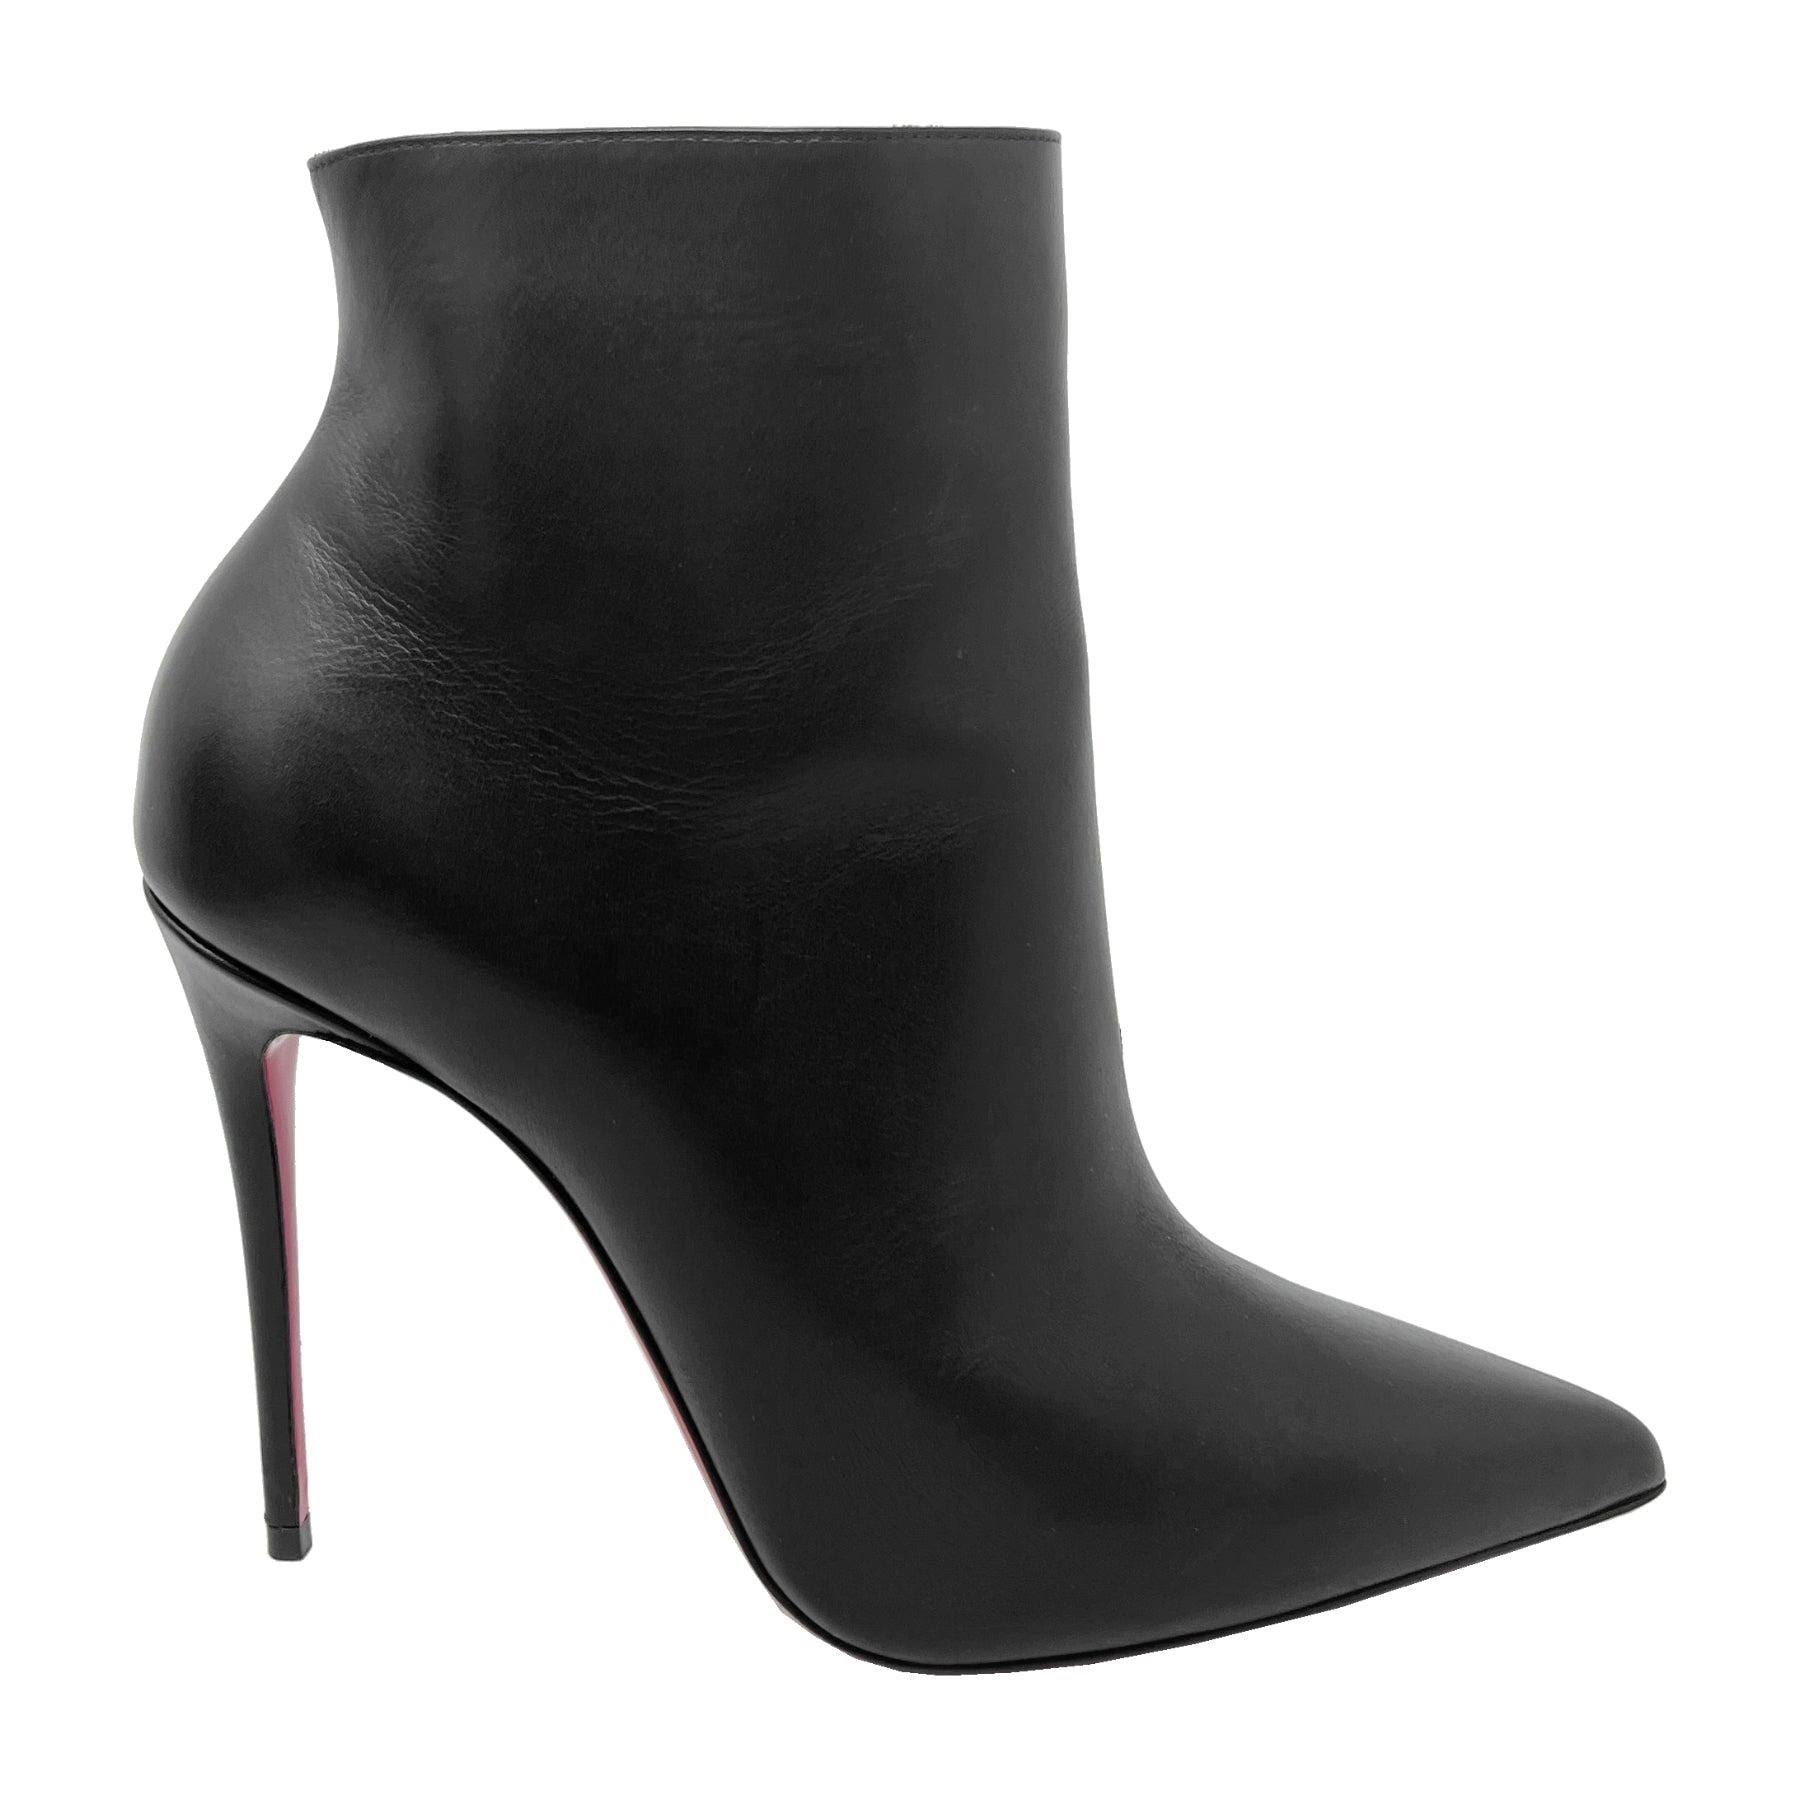 Christian Louboutin So Kate 100 Black Leather Pointed Toe Stiletto Ankle Boots